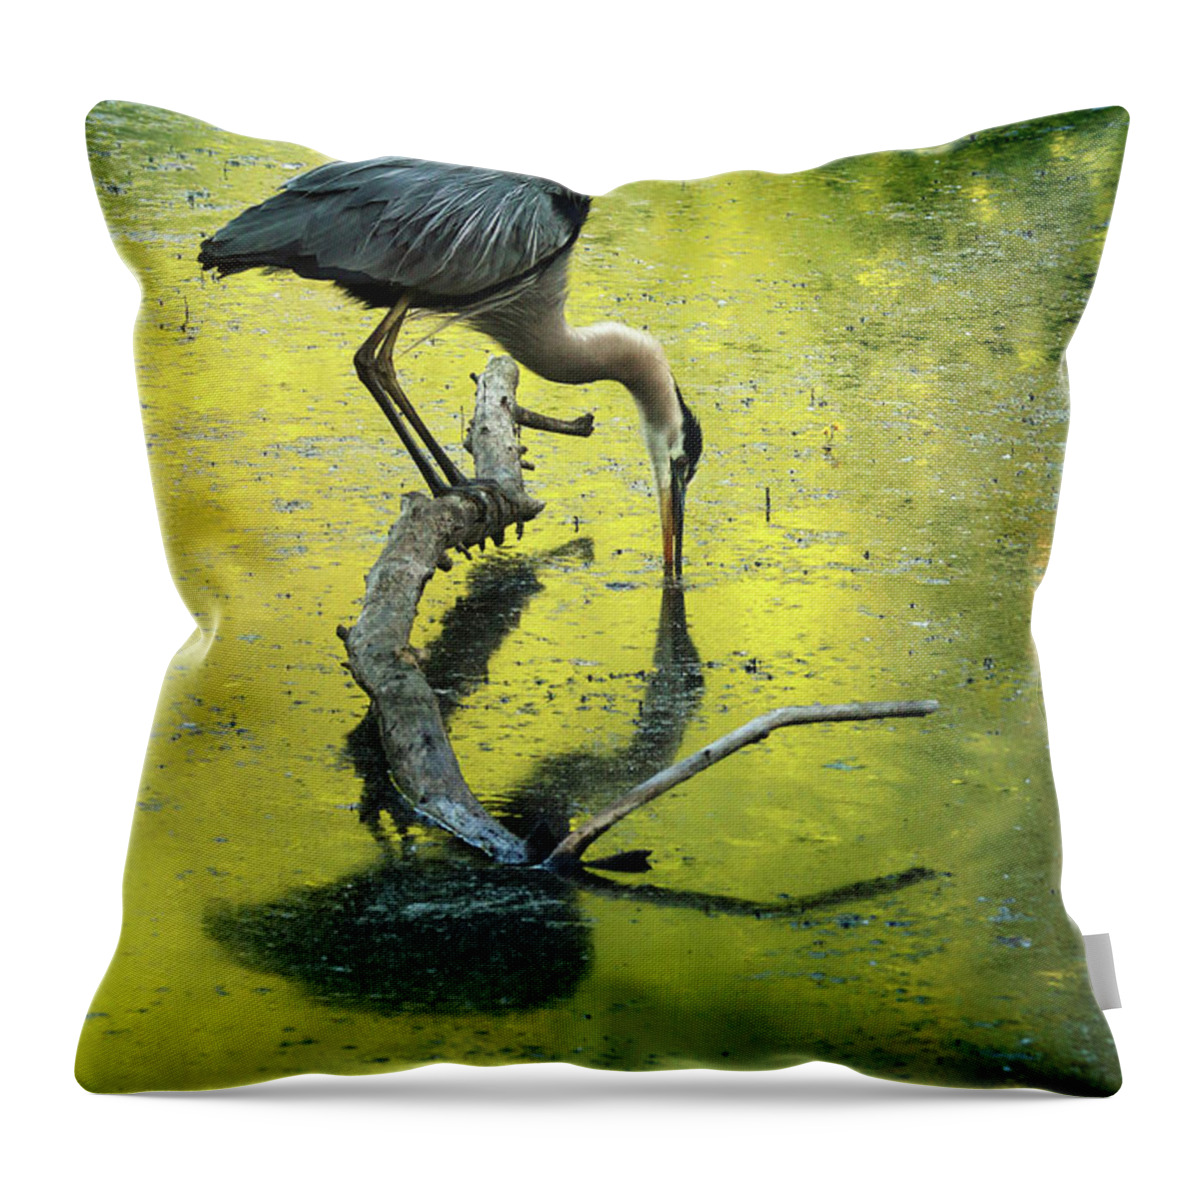 Blue Heron Throw Pillow featuring the photograph Blue Heron Reflection by Rob Blair